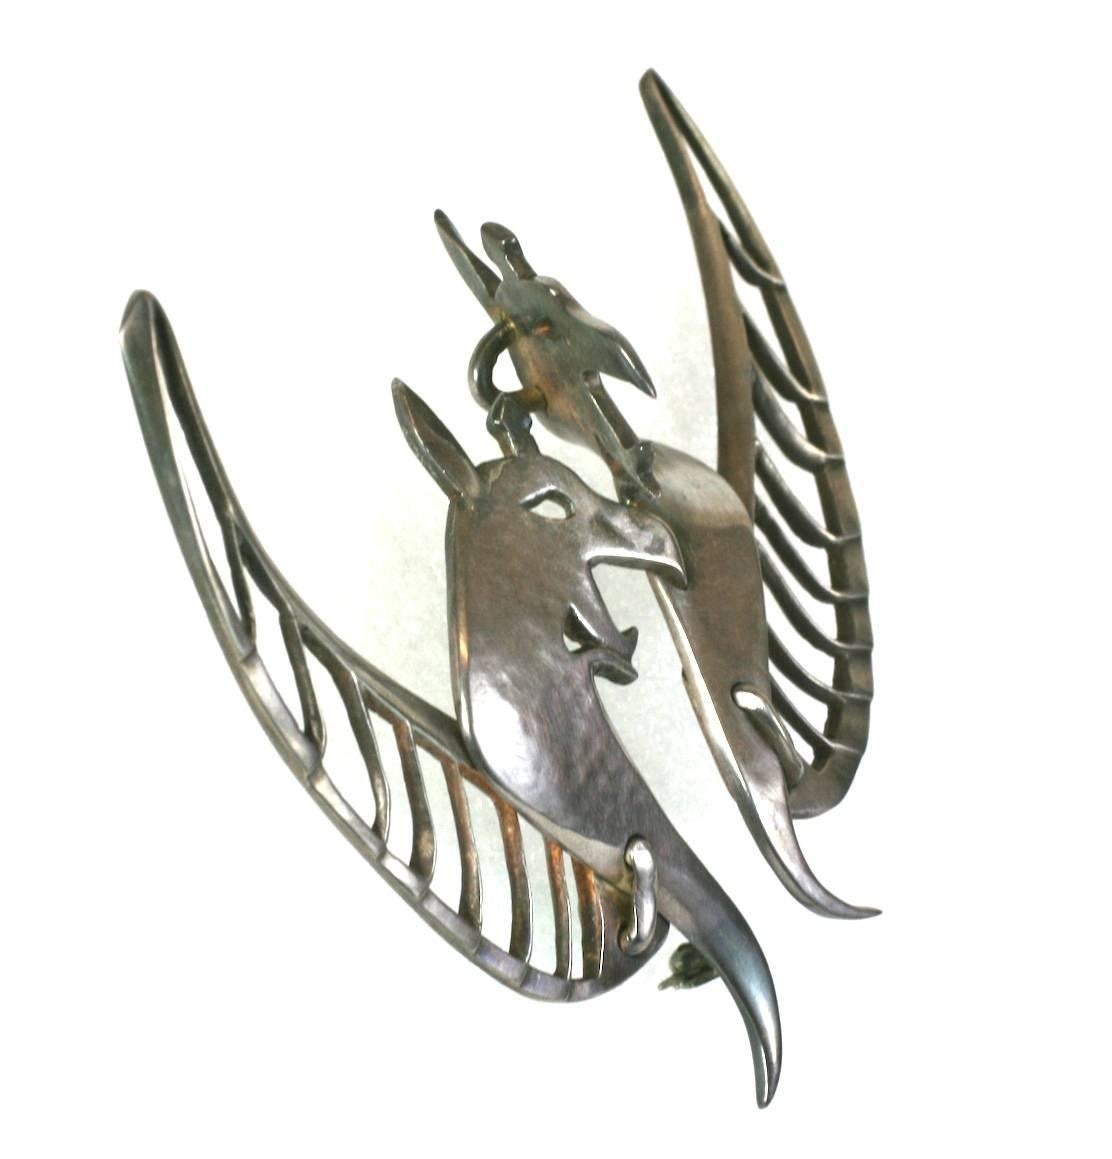 Unusual Artisan hand crafted double Gargoyle Modernist brooch from the 1980's with pendant attachment for use on a necklace.
Large and striking, with both pierced and hammered sterling silver elements which create dimension on this hand made piece.